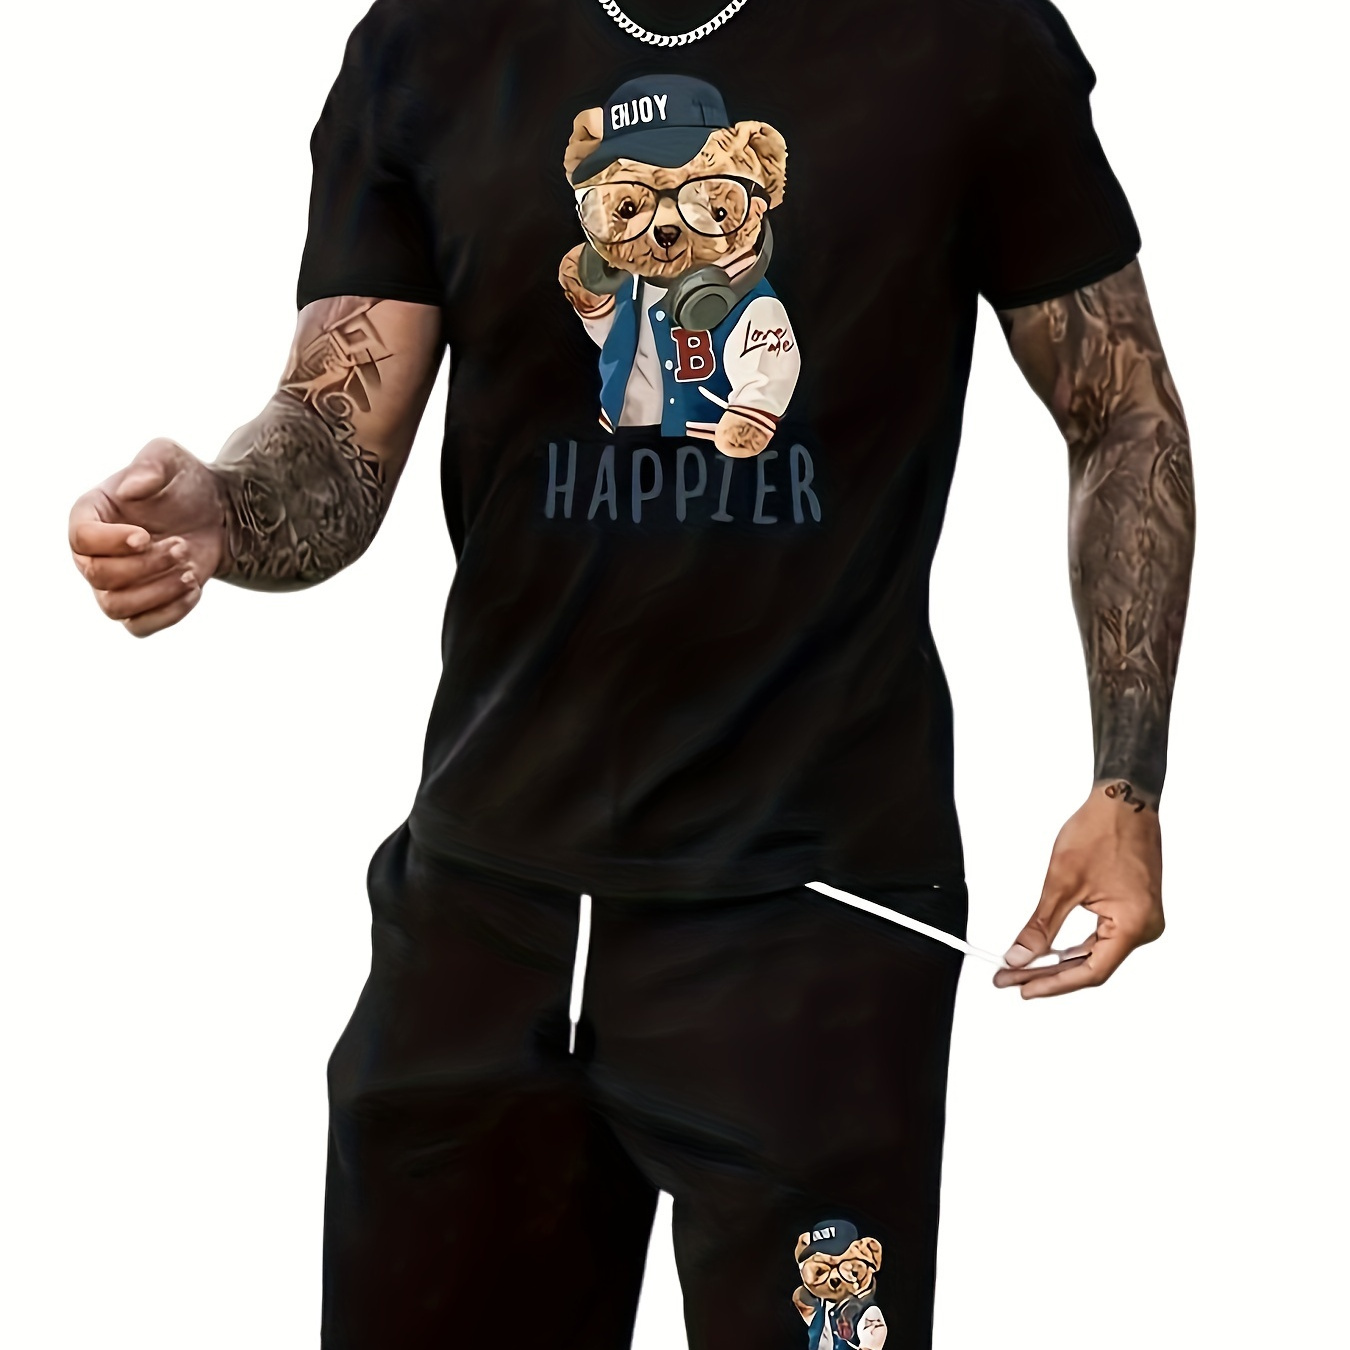 

Men's Comfortable T -shirt & Short With Pocket Home Wear - Bear Print Pj Set Perfect For Leisure At Home! Summer Fashion Suit Shorts